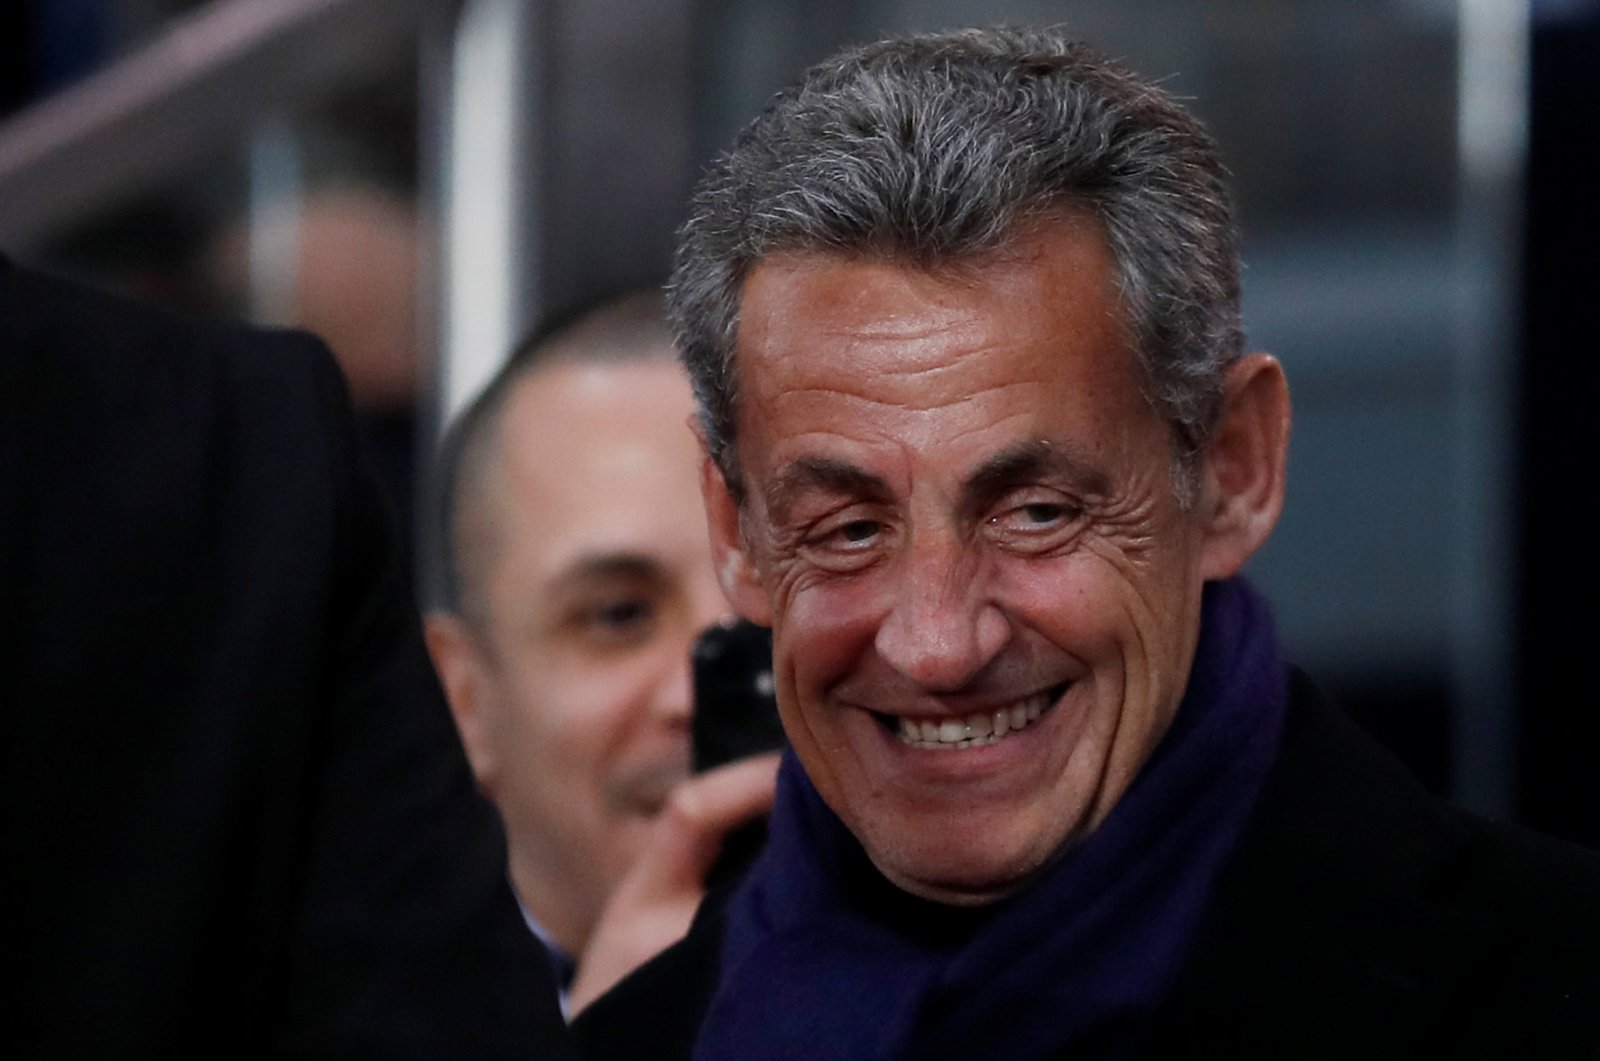 Former French President Nicolas Sarkozy in the stands before a Paris Saint-Germain match, Paris, France, Jan. 8, 2020. (Reuters Photo)